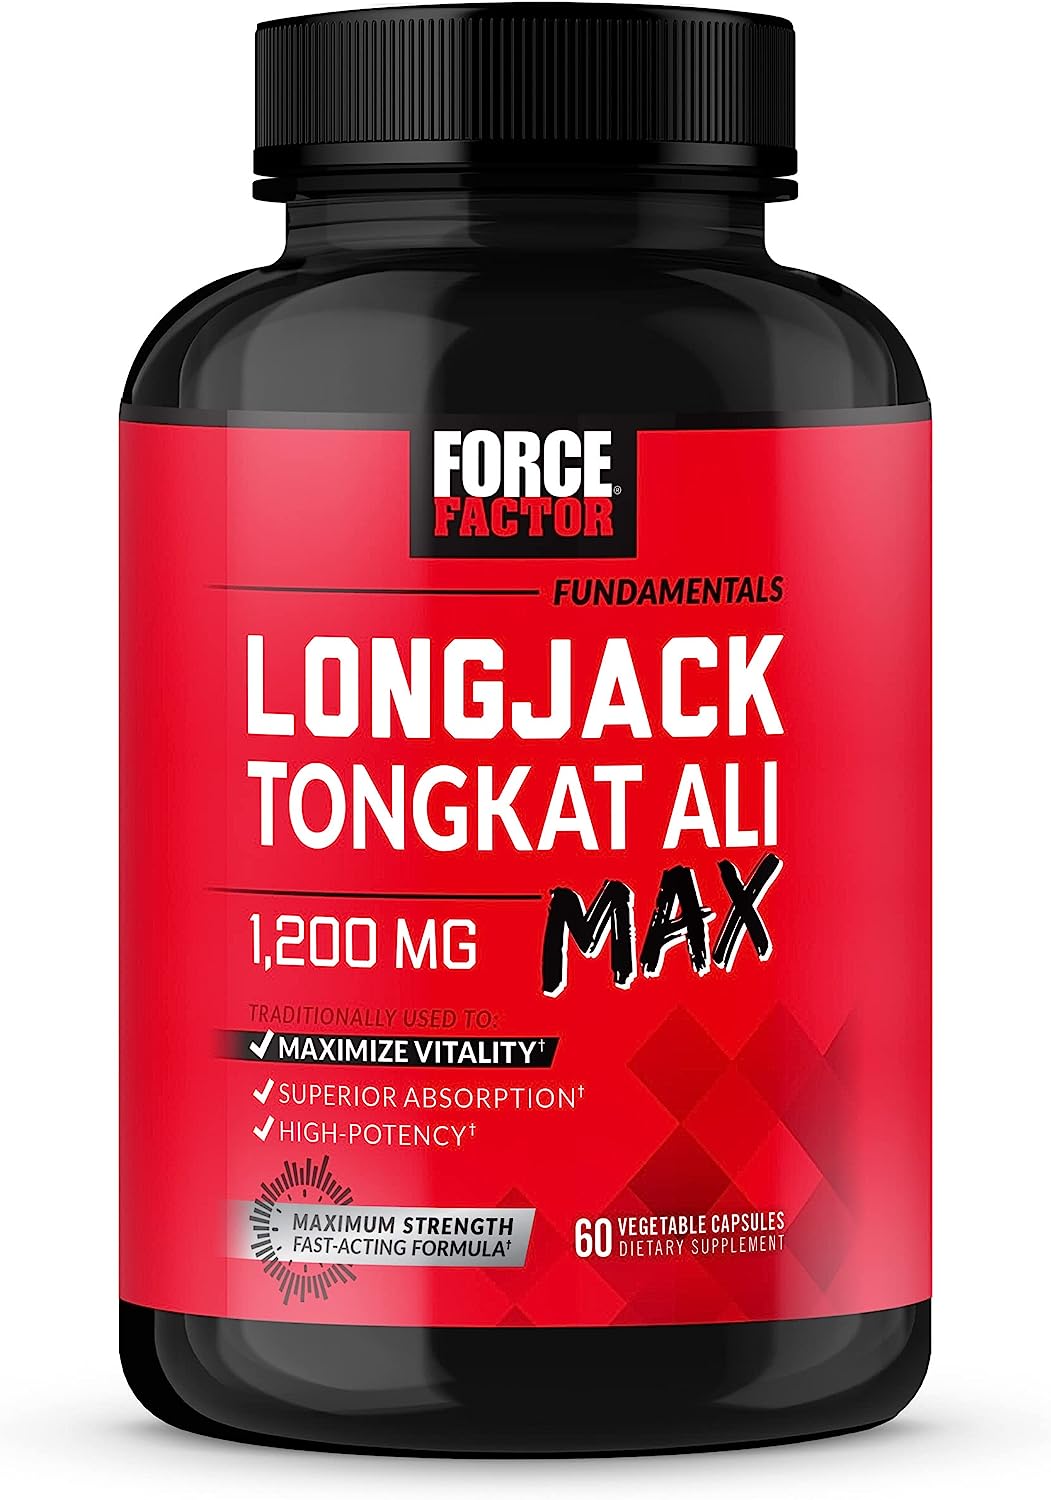 Force Factor Longjack Tongkat Ali Max for Men, Male Stamina and Vitality Supplement Made with Tongkat Ali Extract and Key Natural Ingredients for Superior Absorption, 1200mg, 60 Capsules